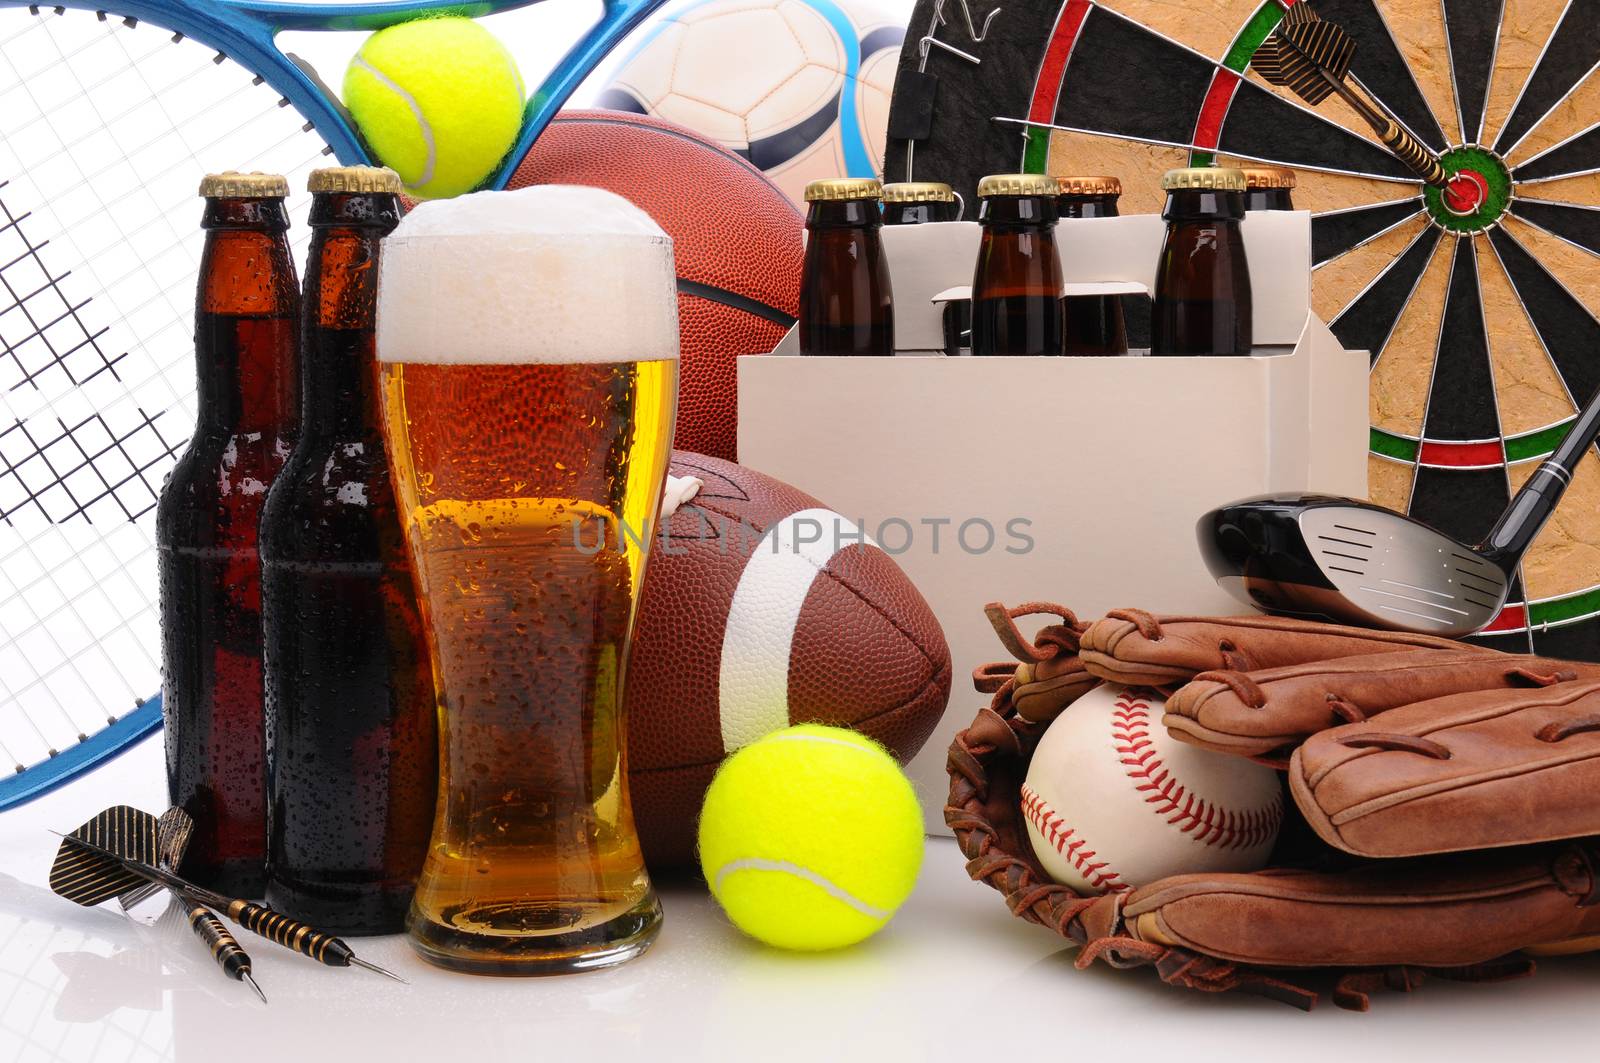 Beer and Sports Equipment by sCukrov